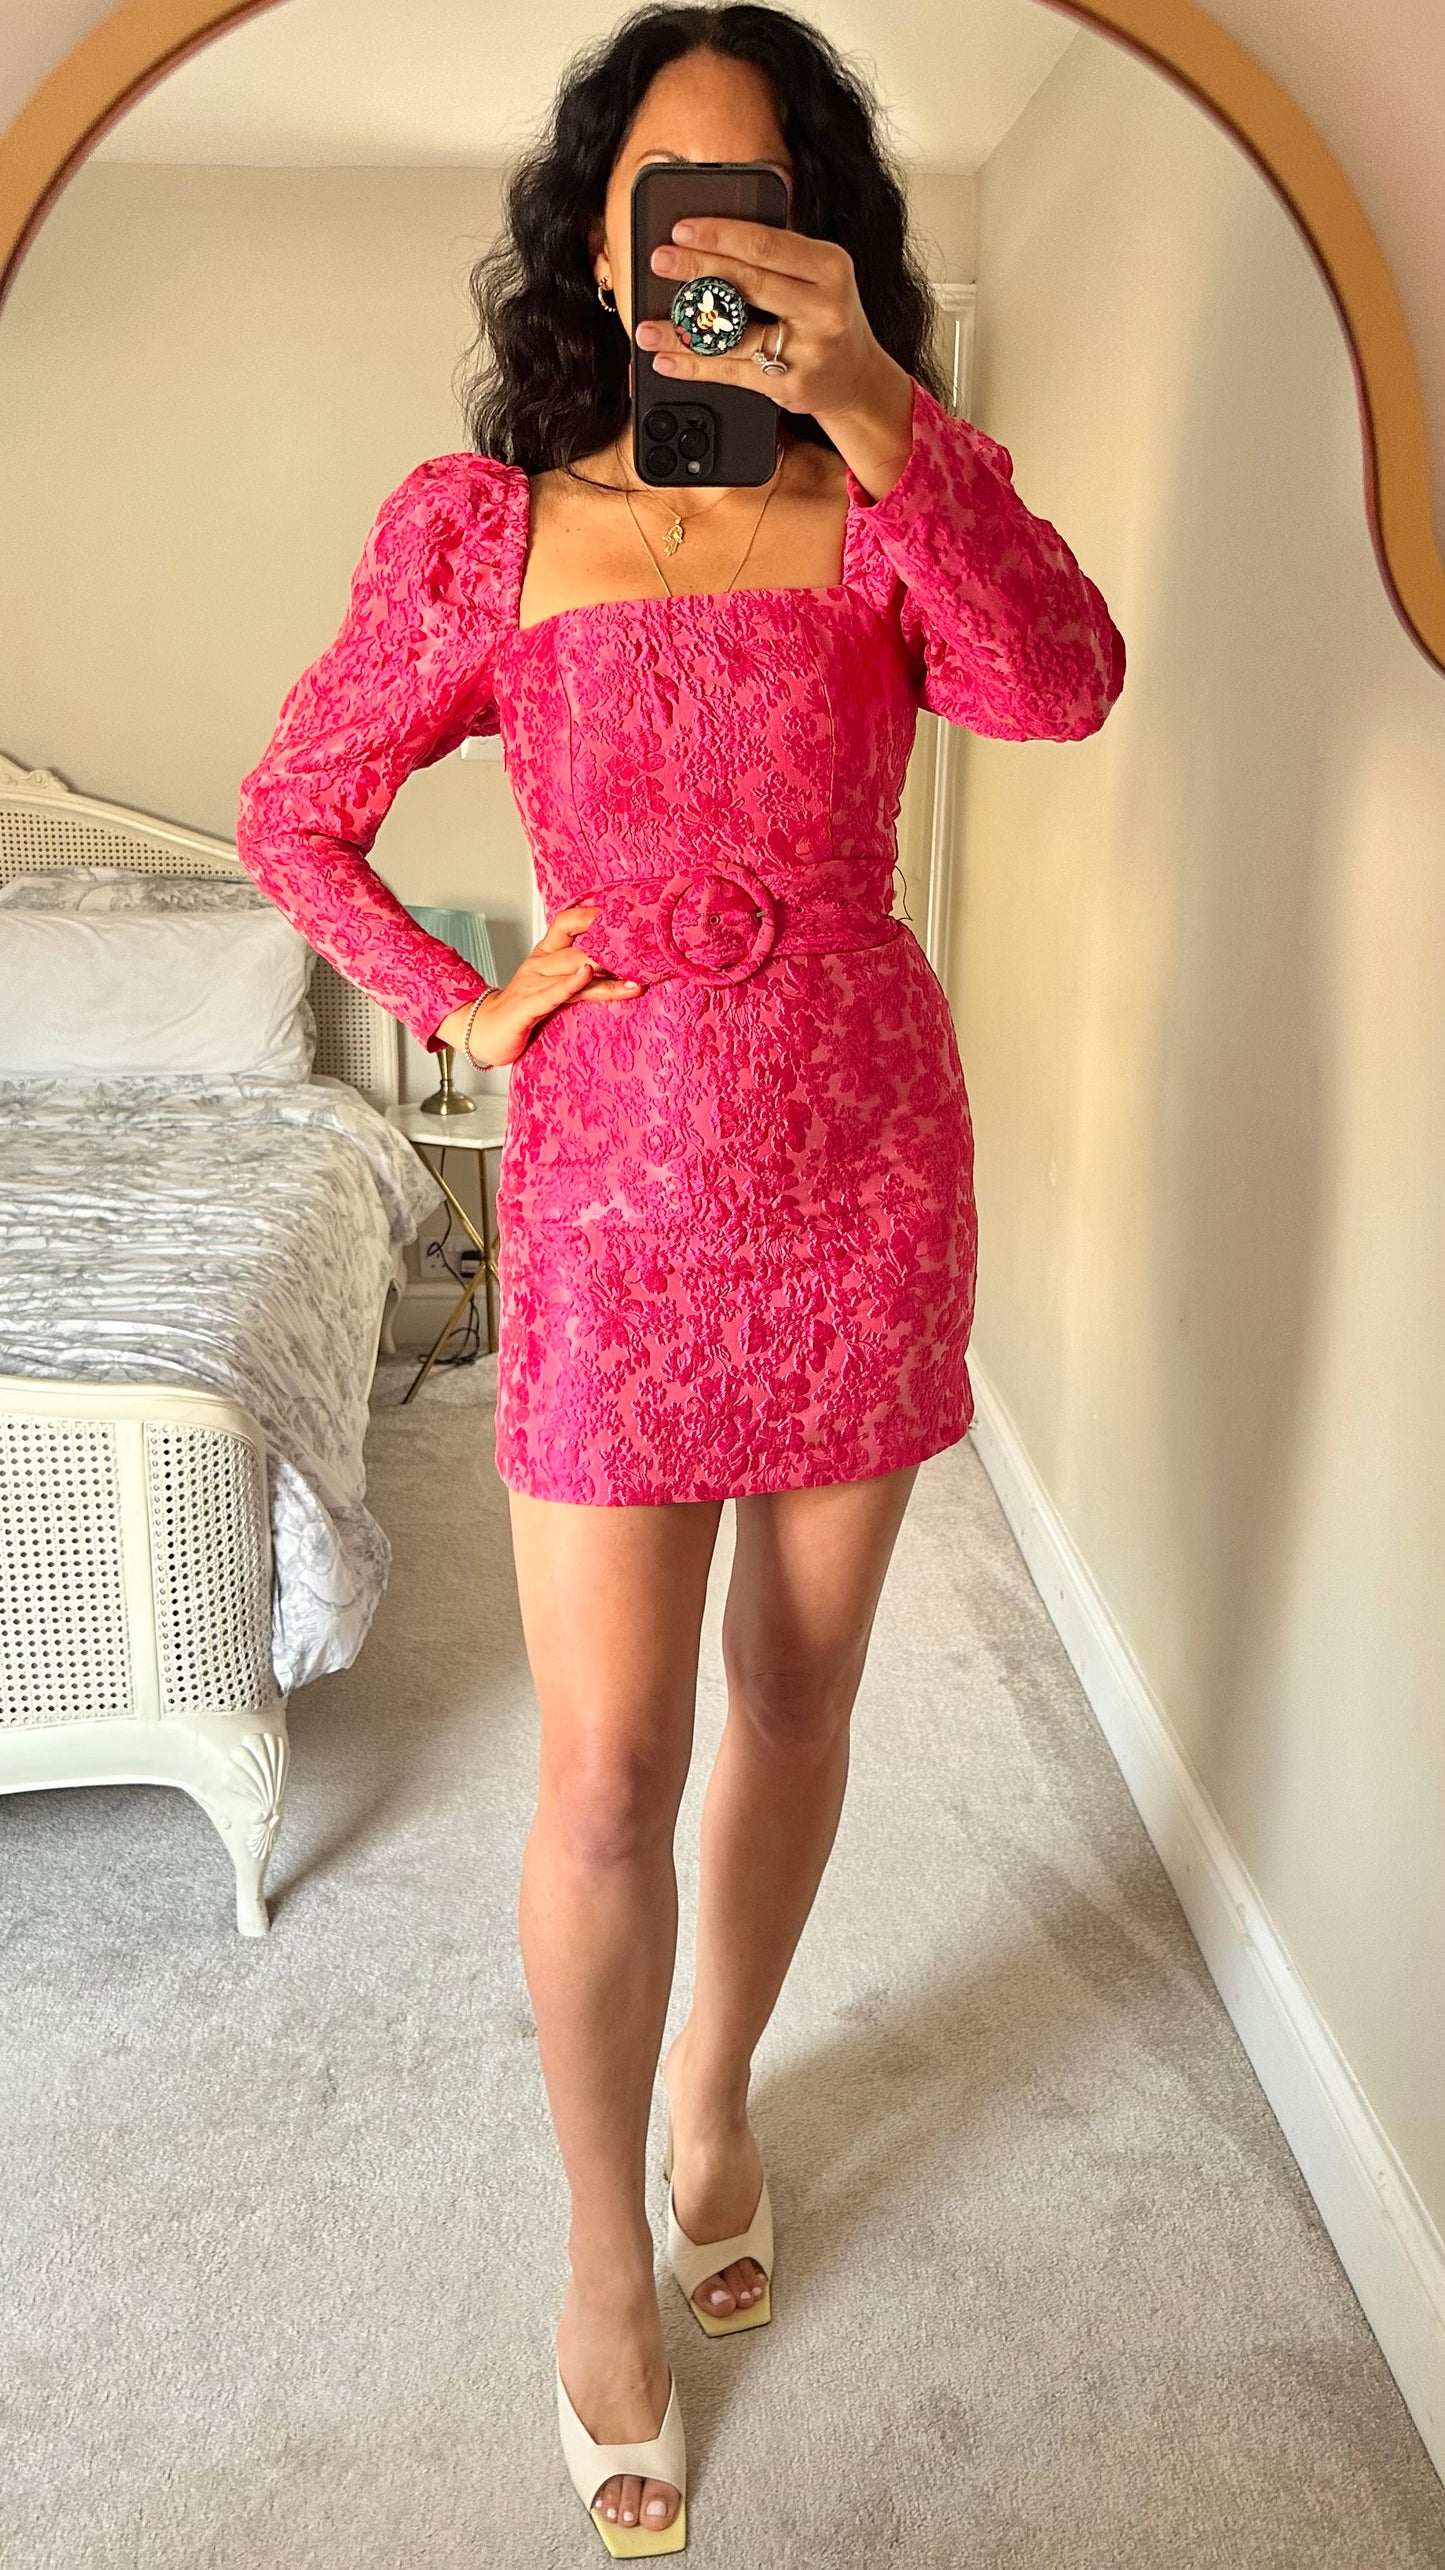 & other stories fuschia pink brocade Emily in Paris mini dress belted xs extra small UK 6